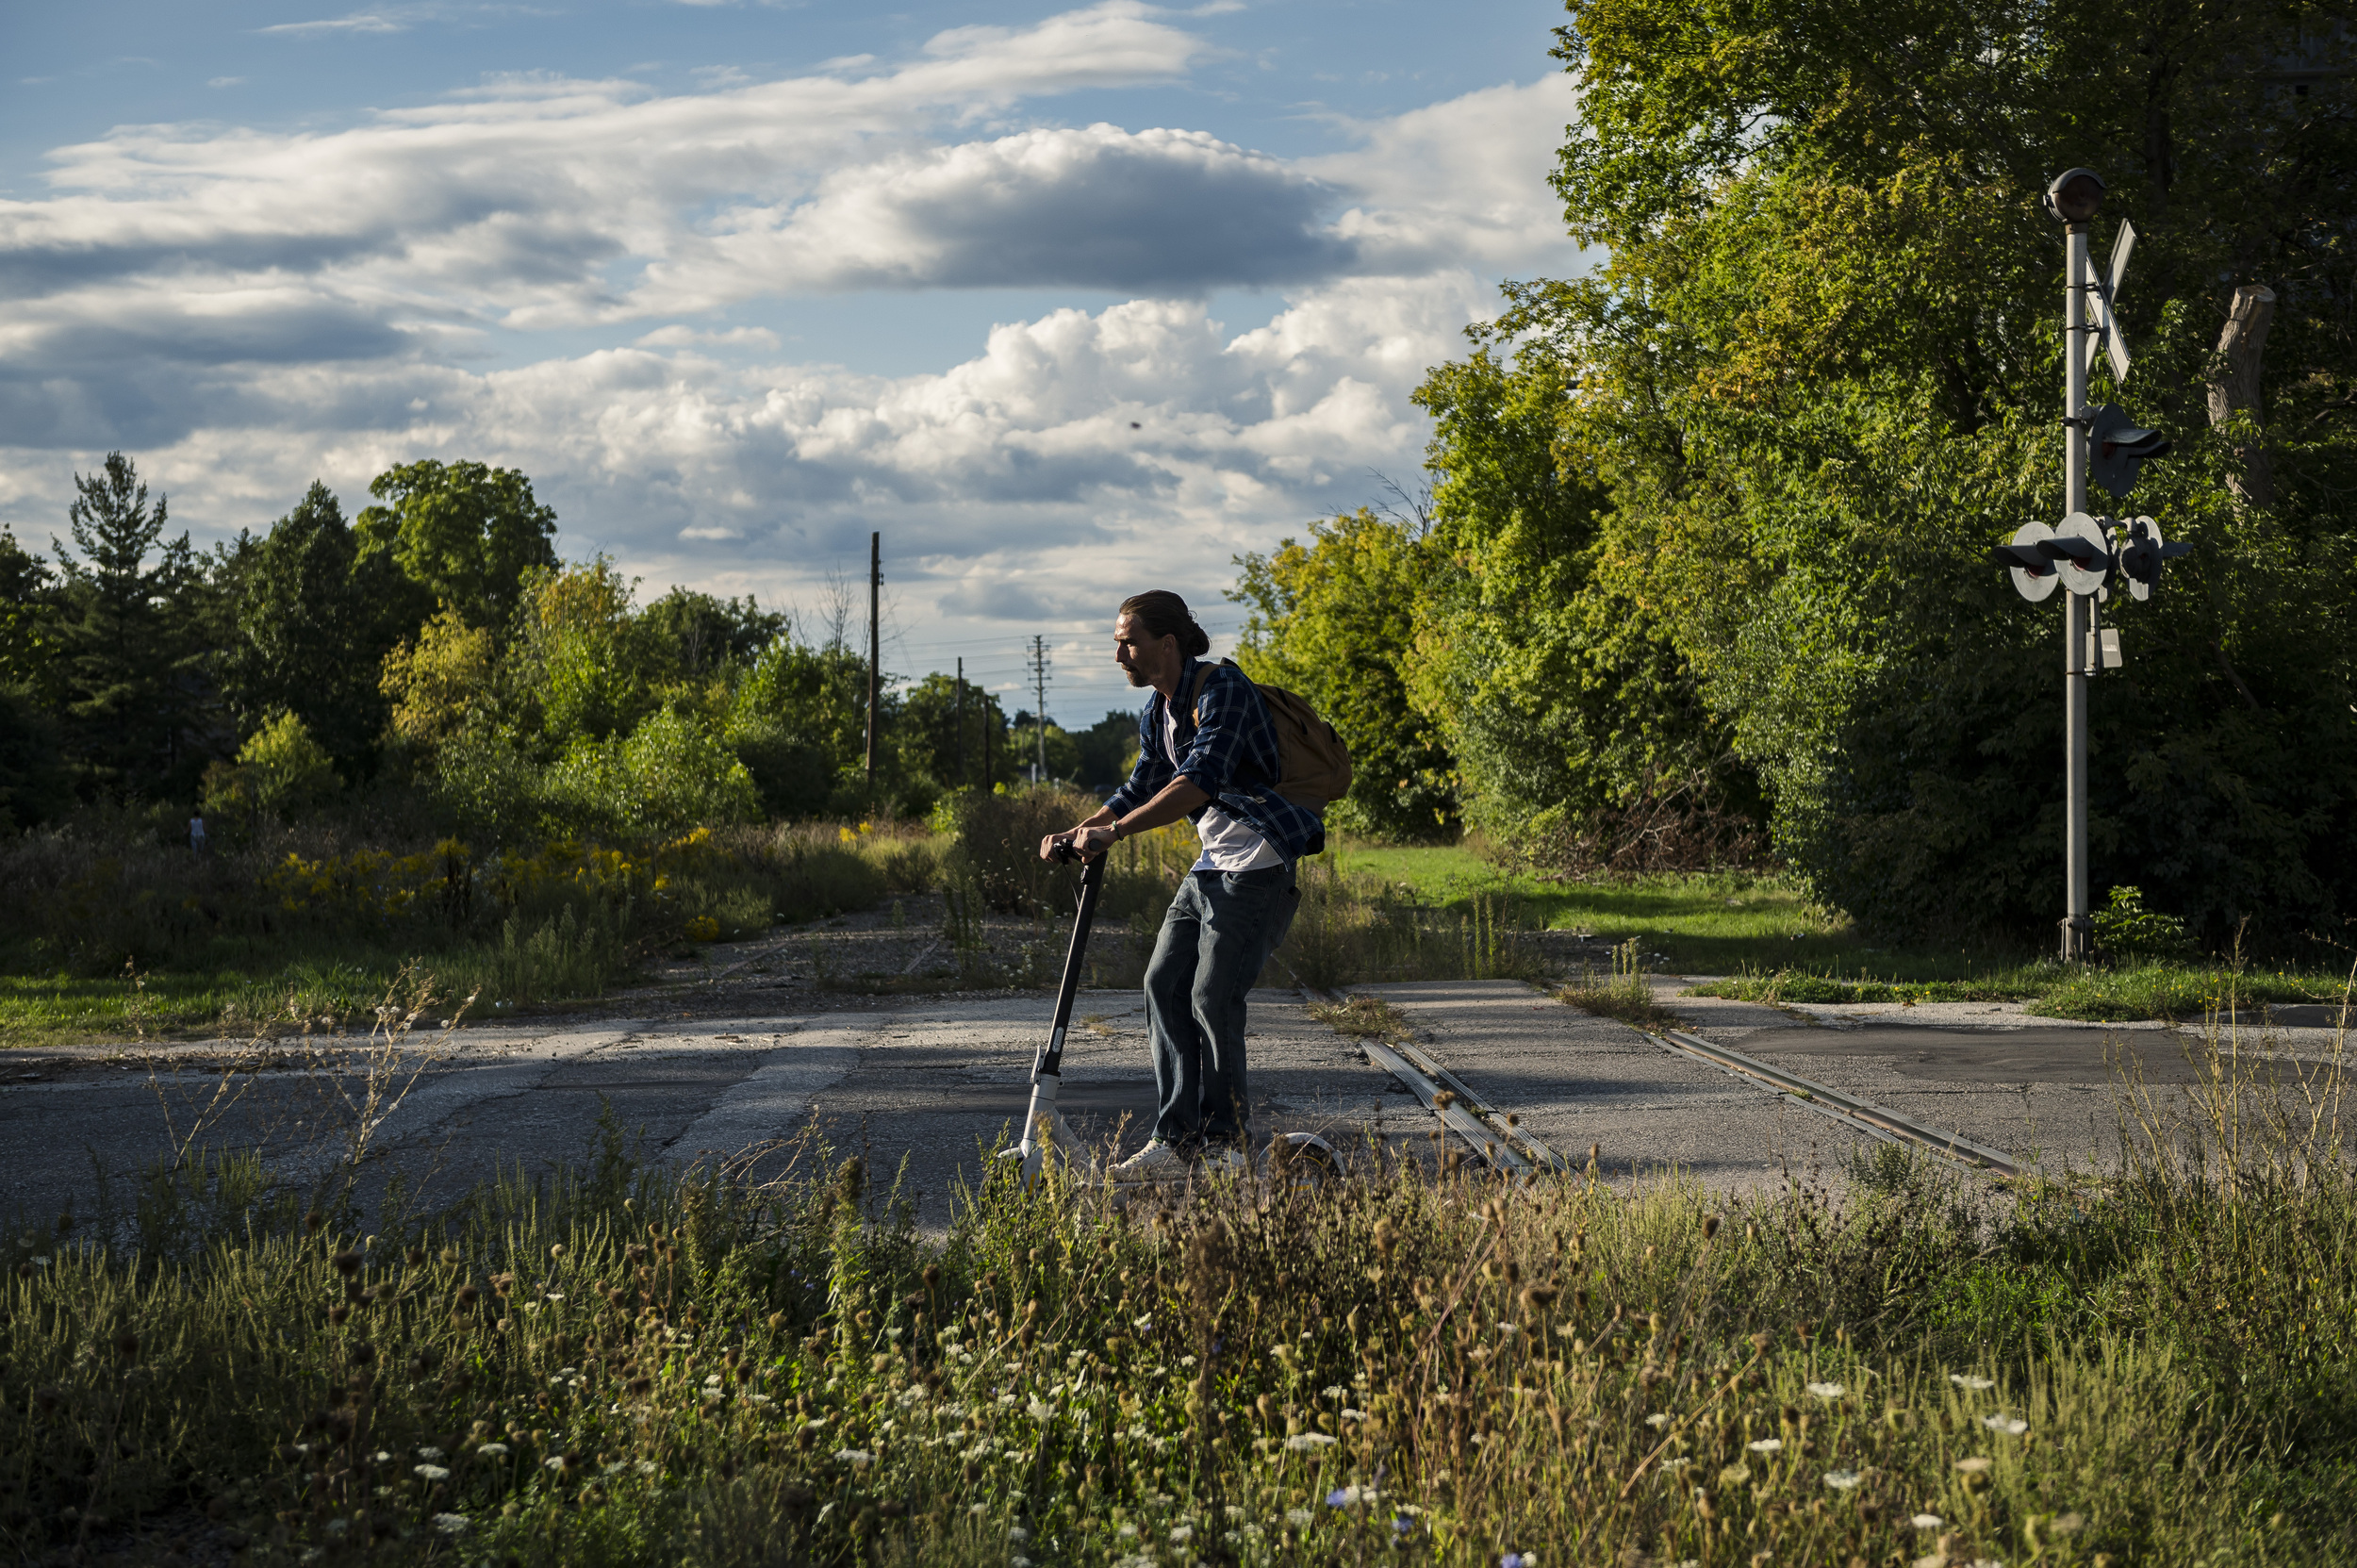 A man travels over the Peel Region rail line in Brampton, Ont. on a scooter.